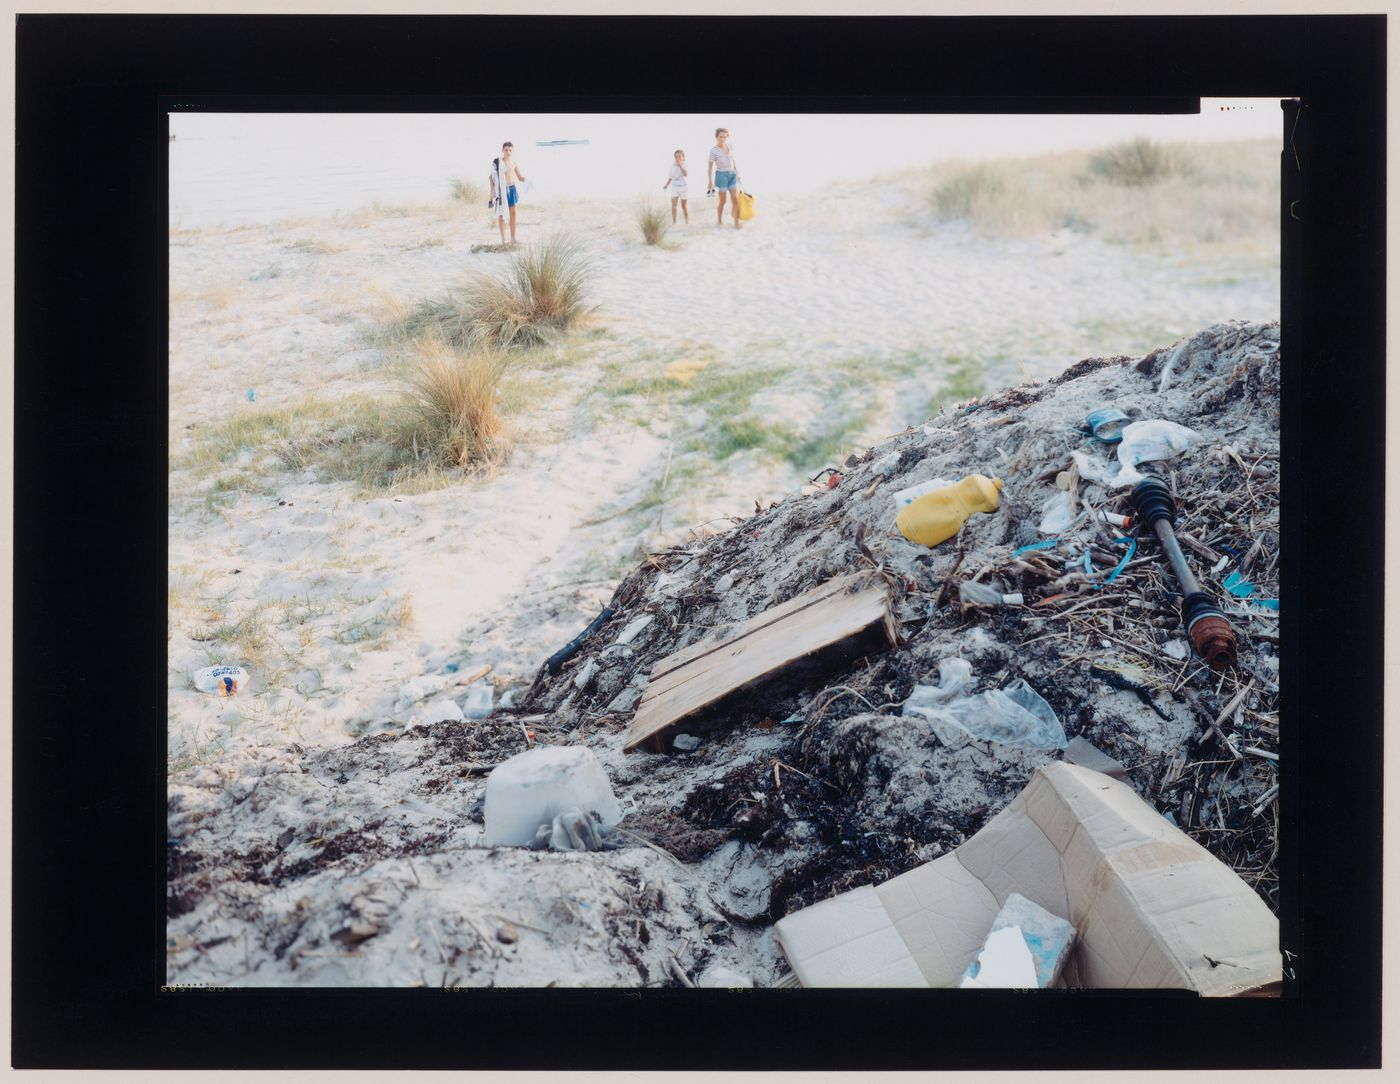 View of a pile of rubbish, a beach and a family, Cape Finisterre, Spain (from the series "In between cities")